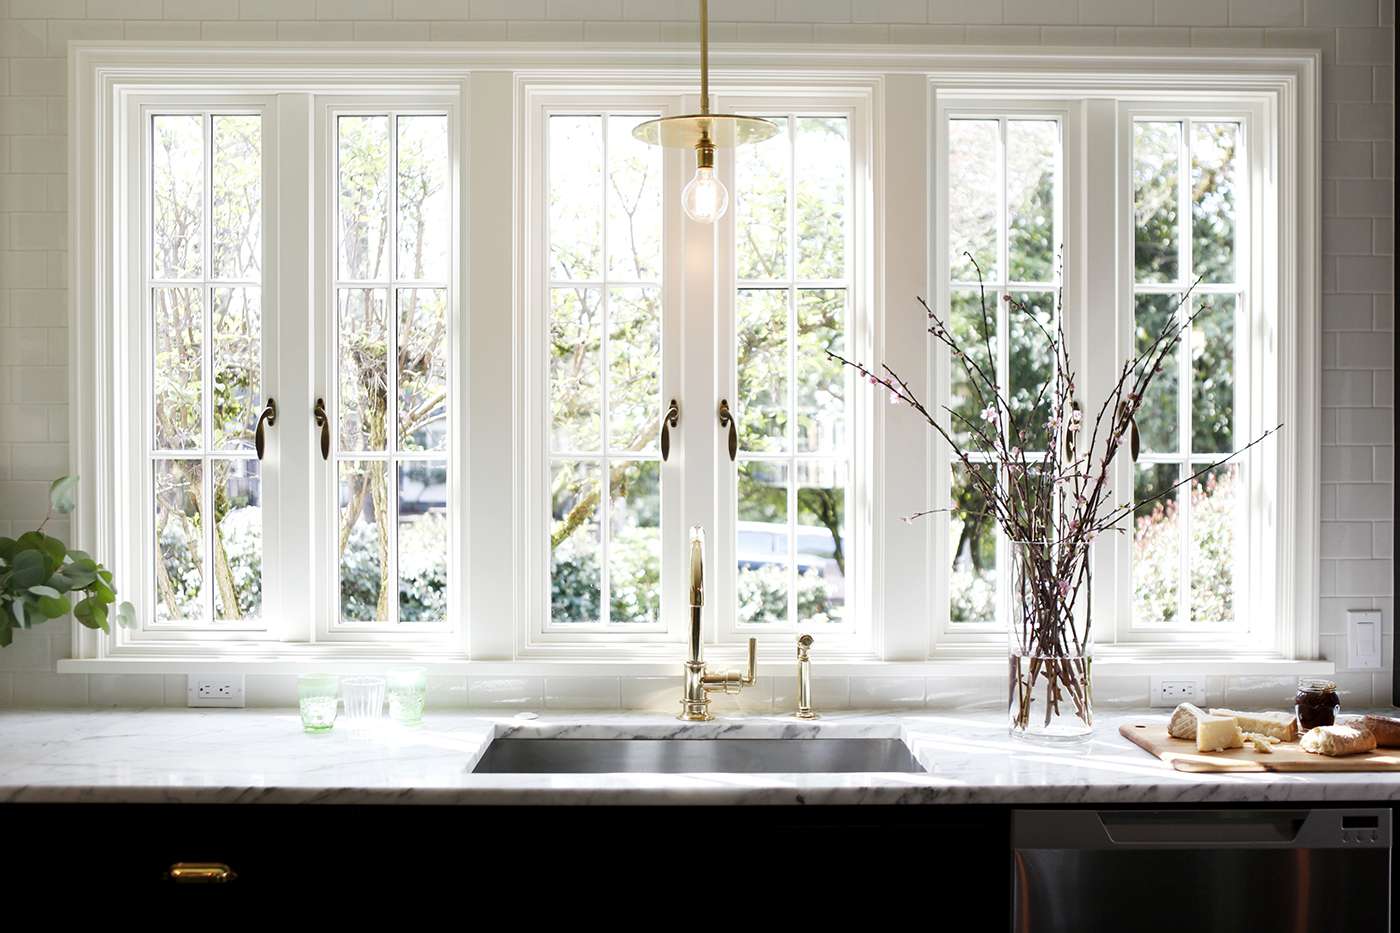 How to Decorate a Kitchen Window